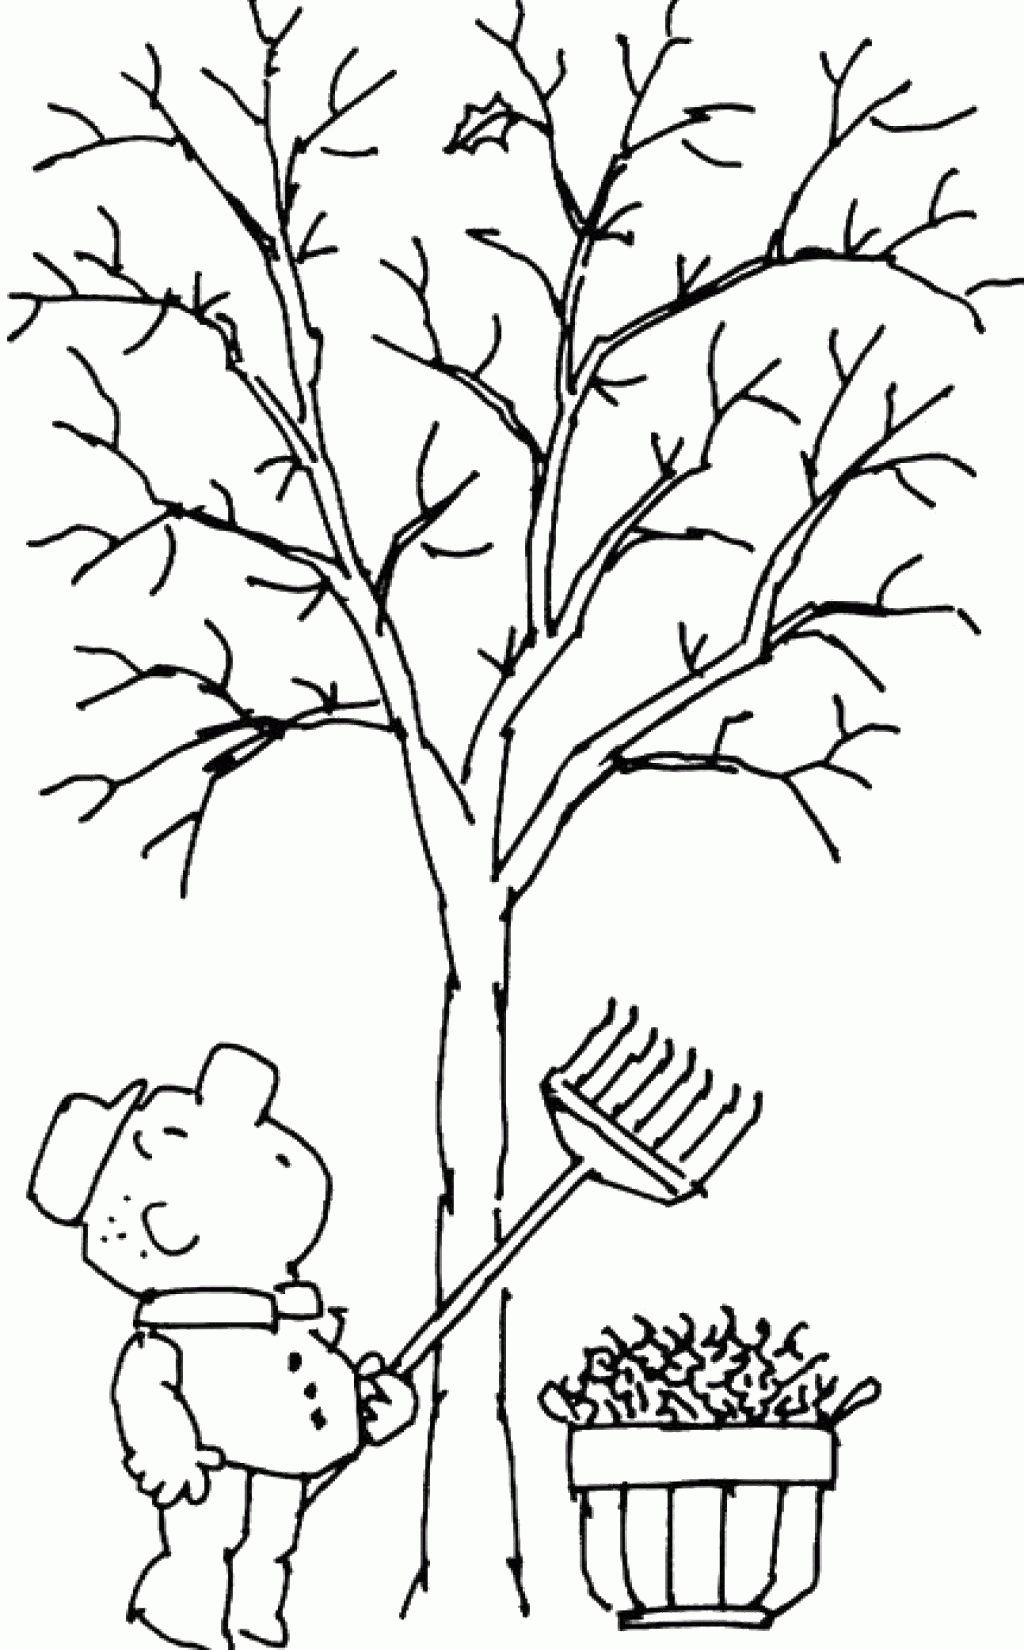 Tree without leaves coloring page to print and download for kids ...